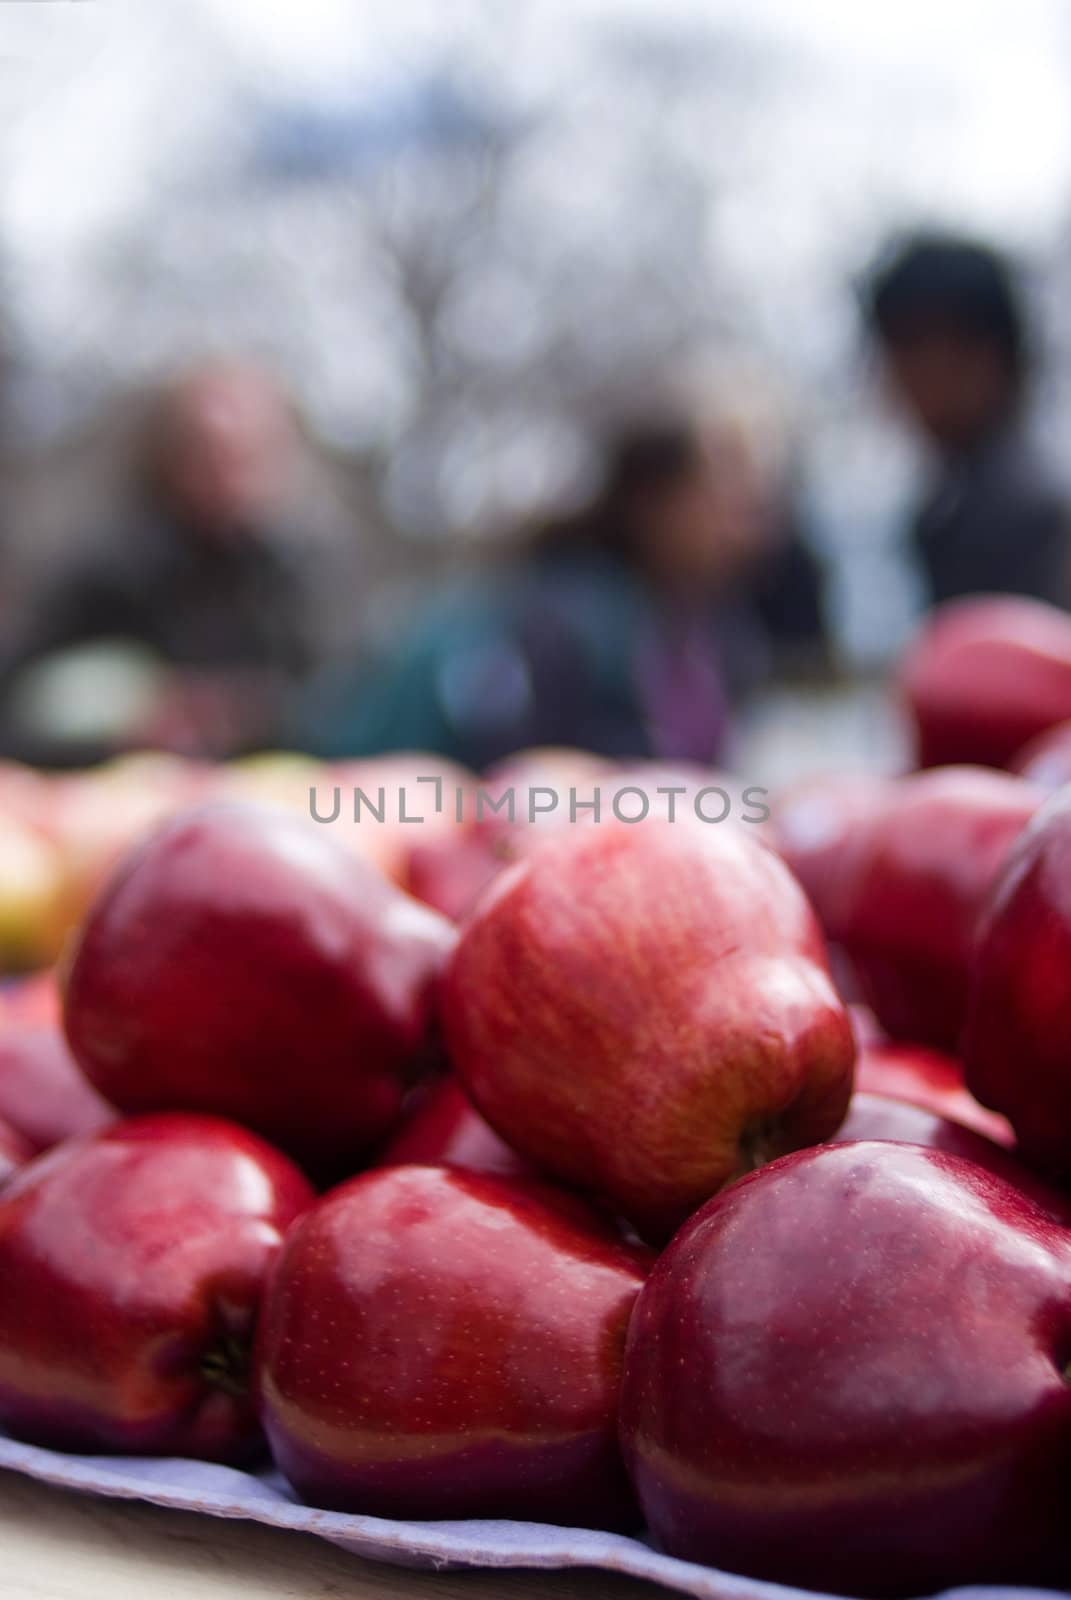 Apples stacked for sale at a market